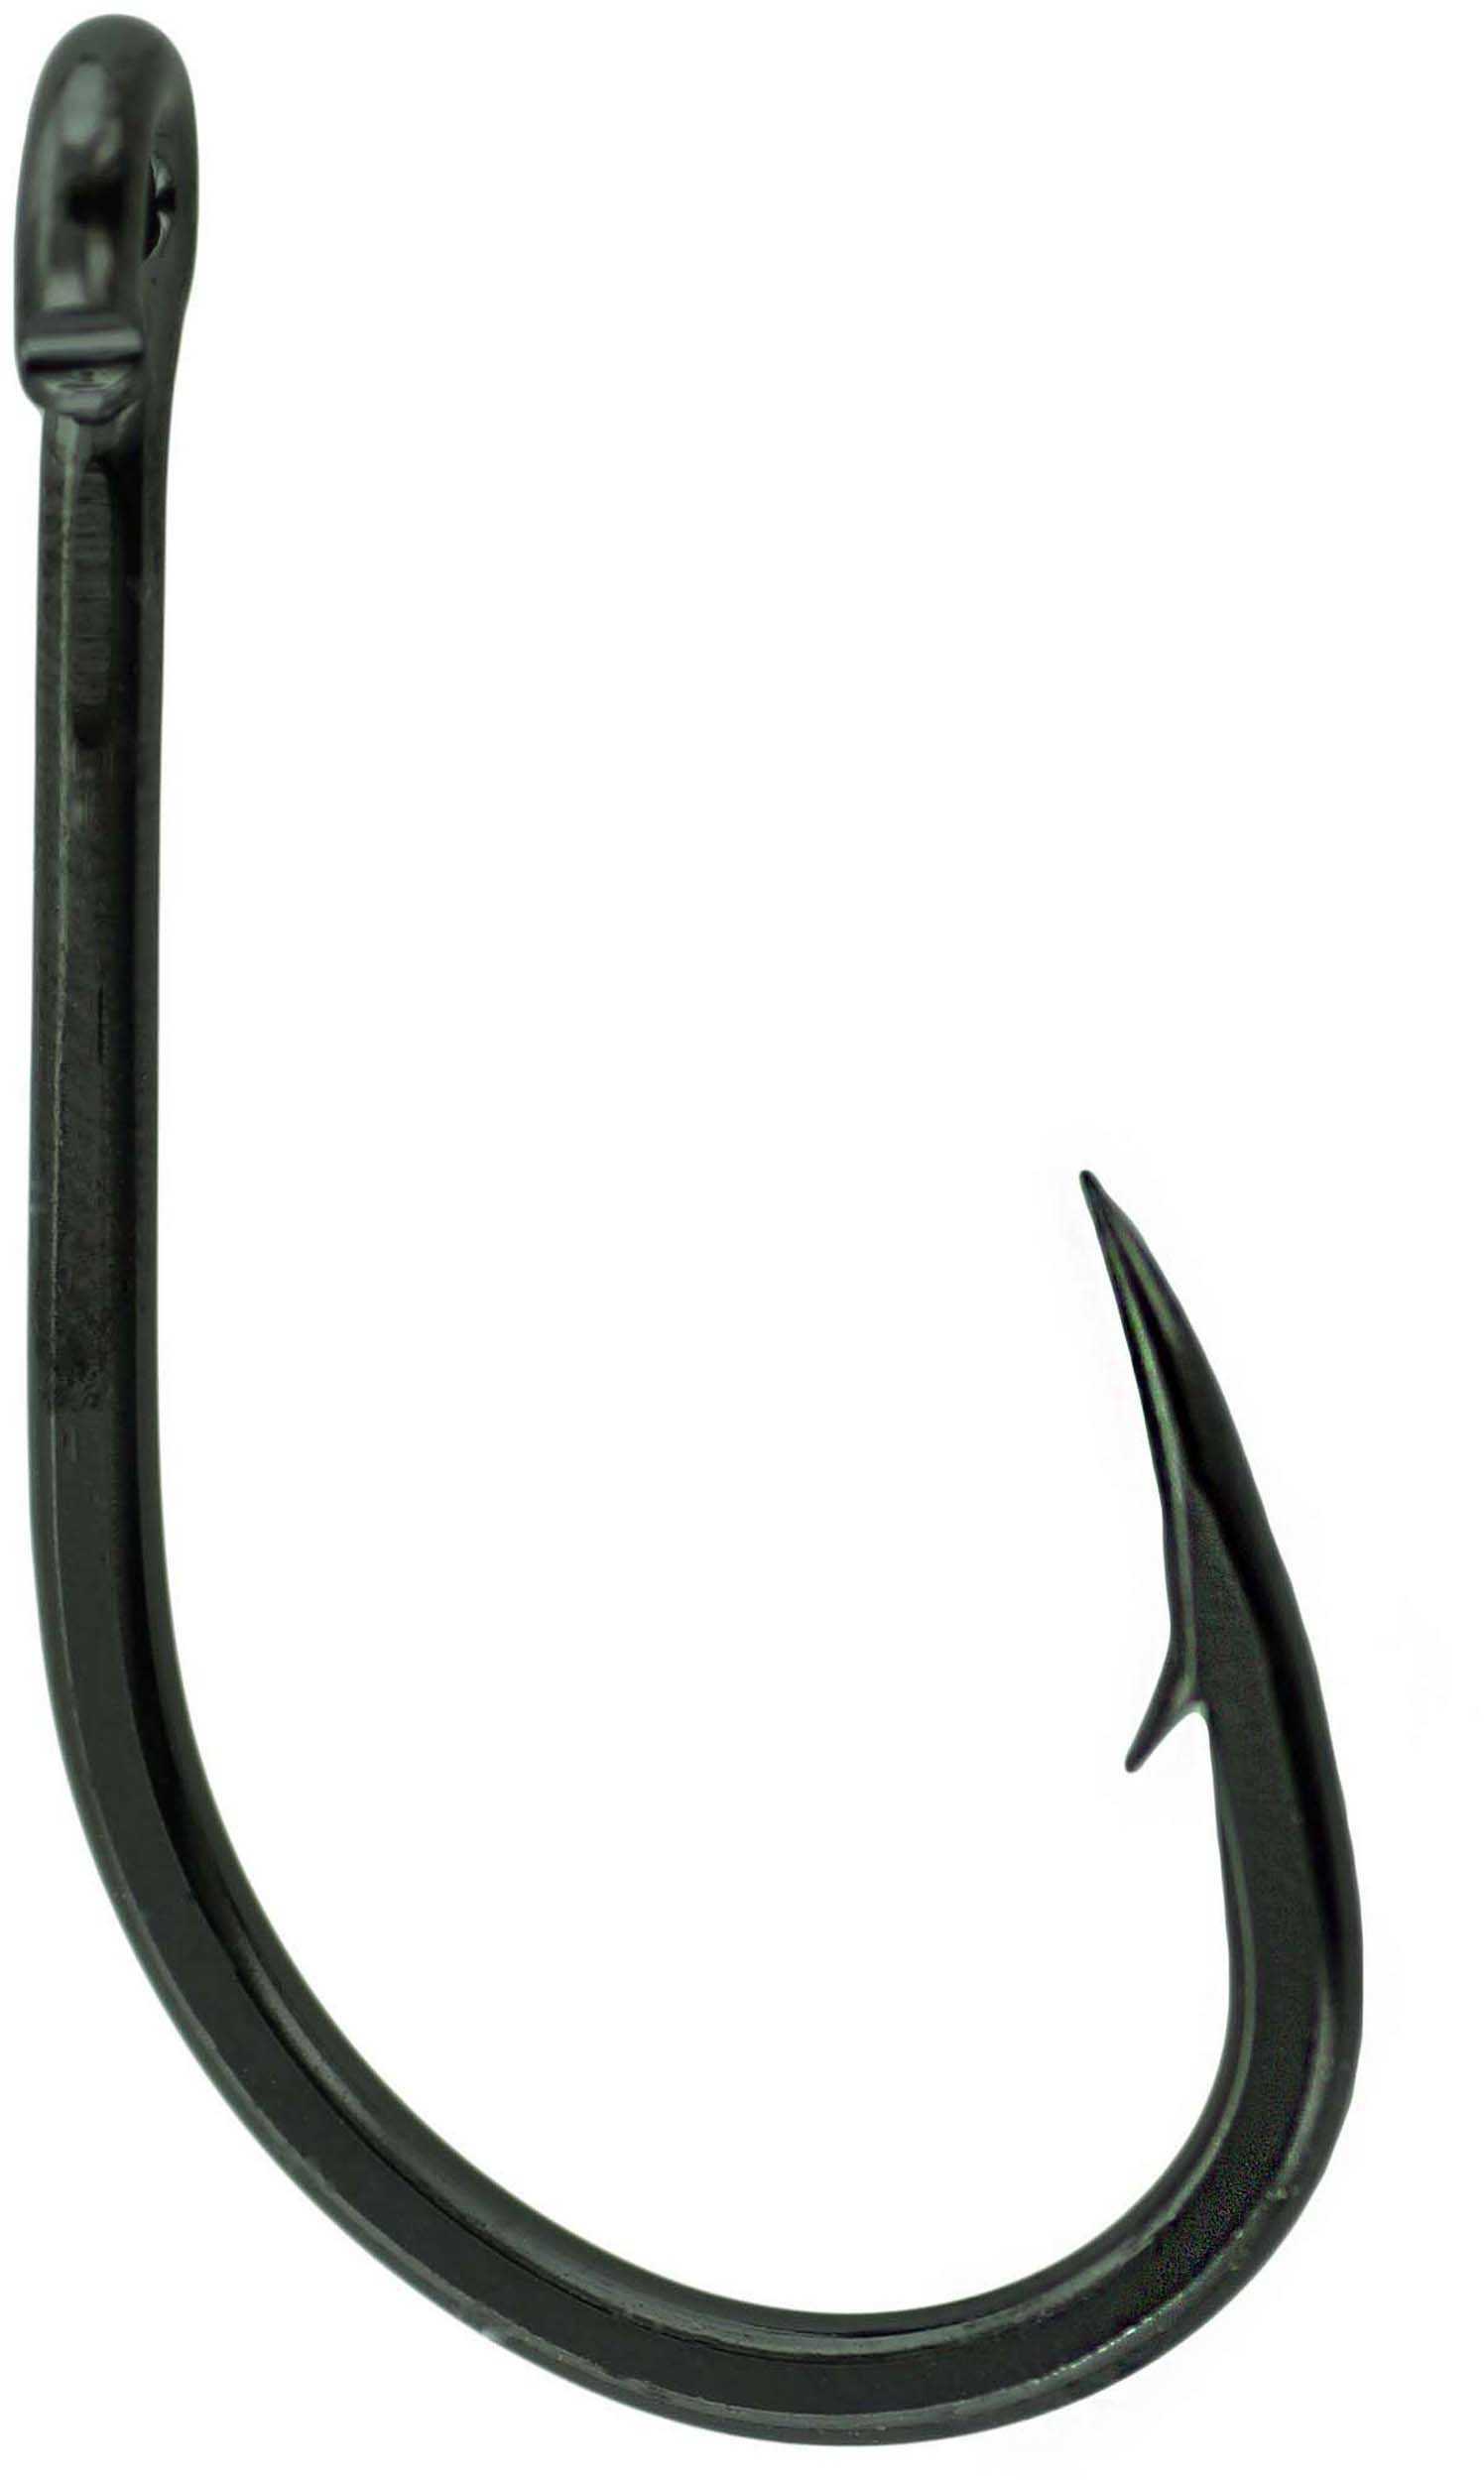 Gamakatsu Octopus Straight Eye 4X Strong Inline Point Hook, NS Black Size 10/0 Md: 263420